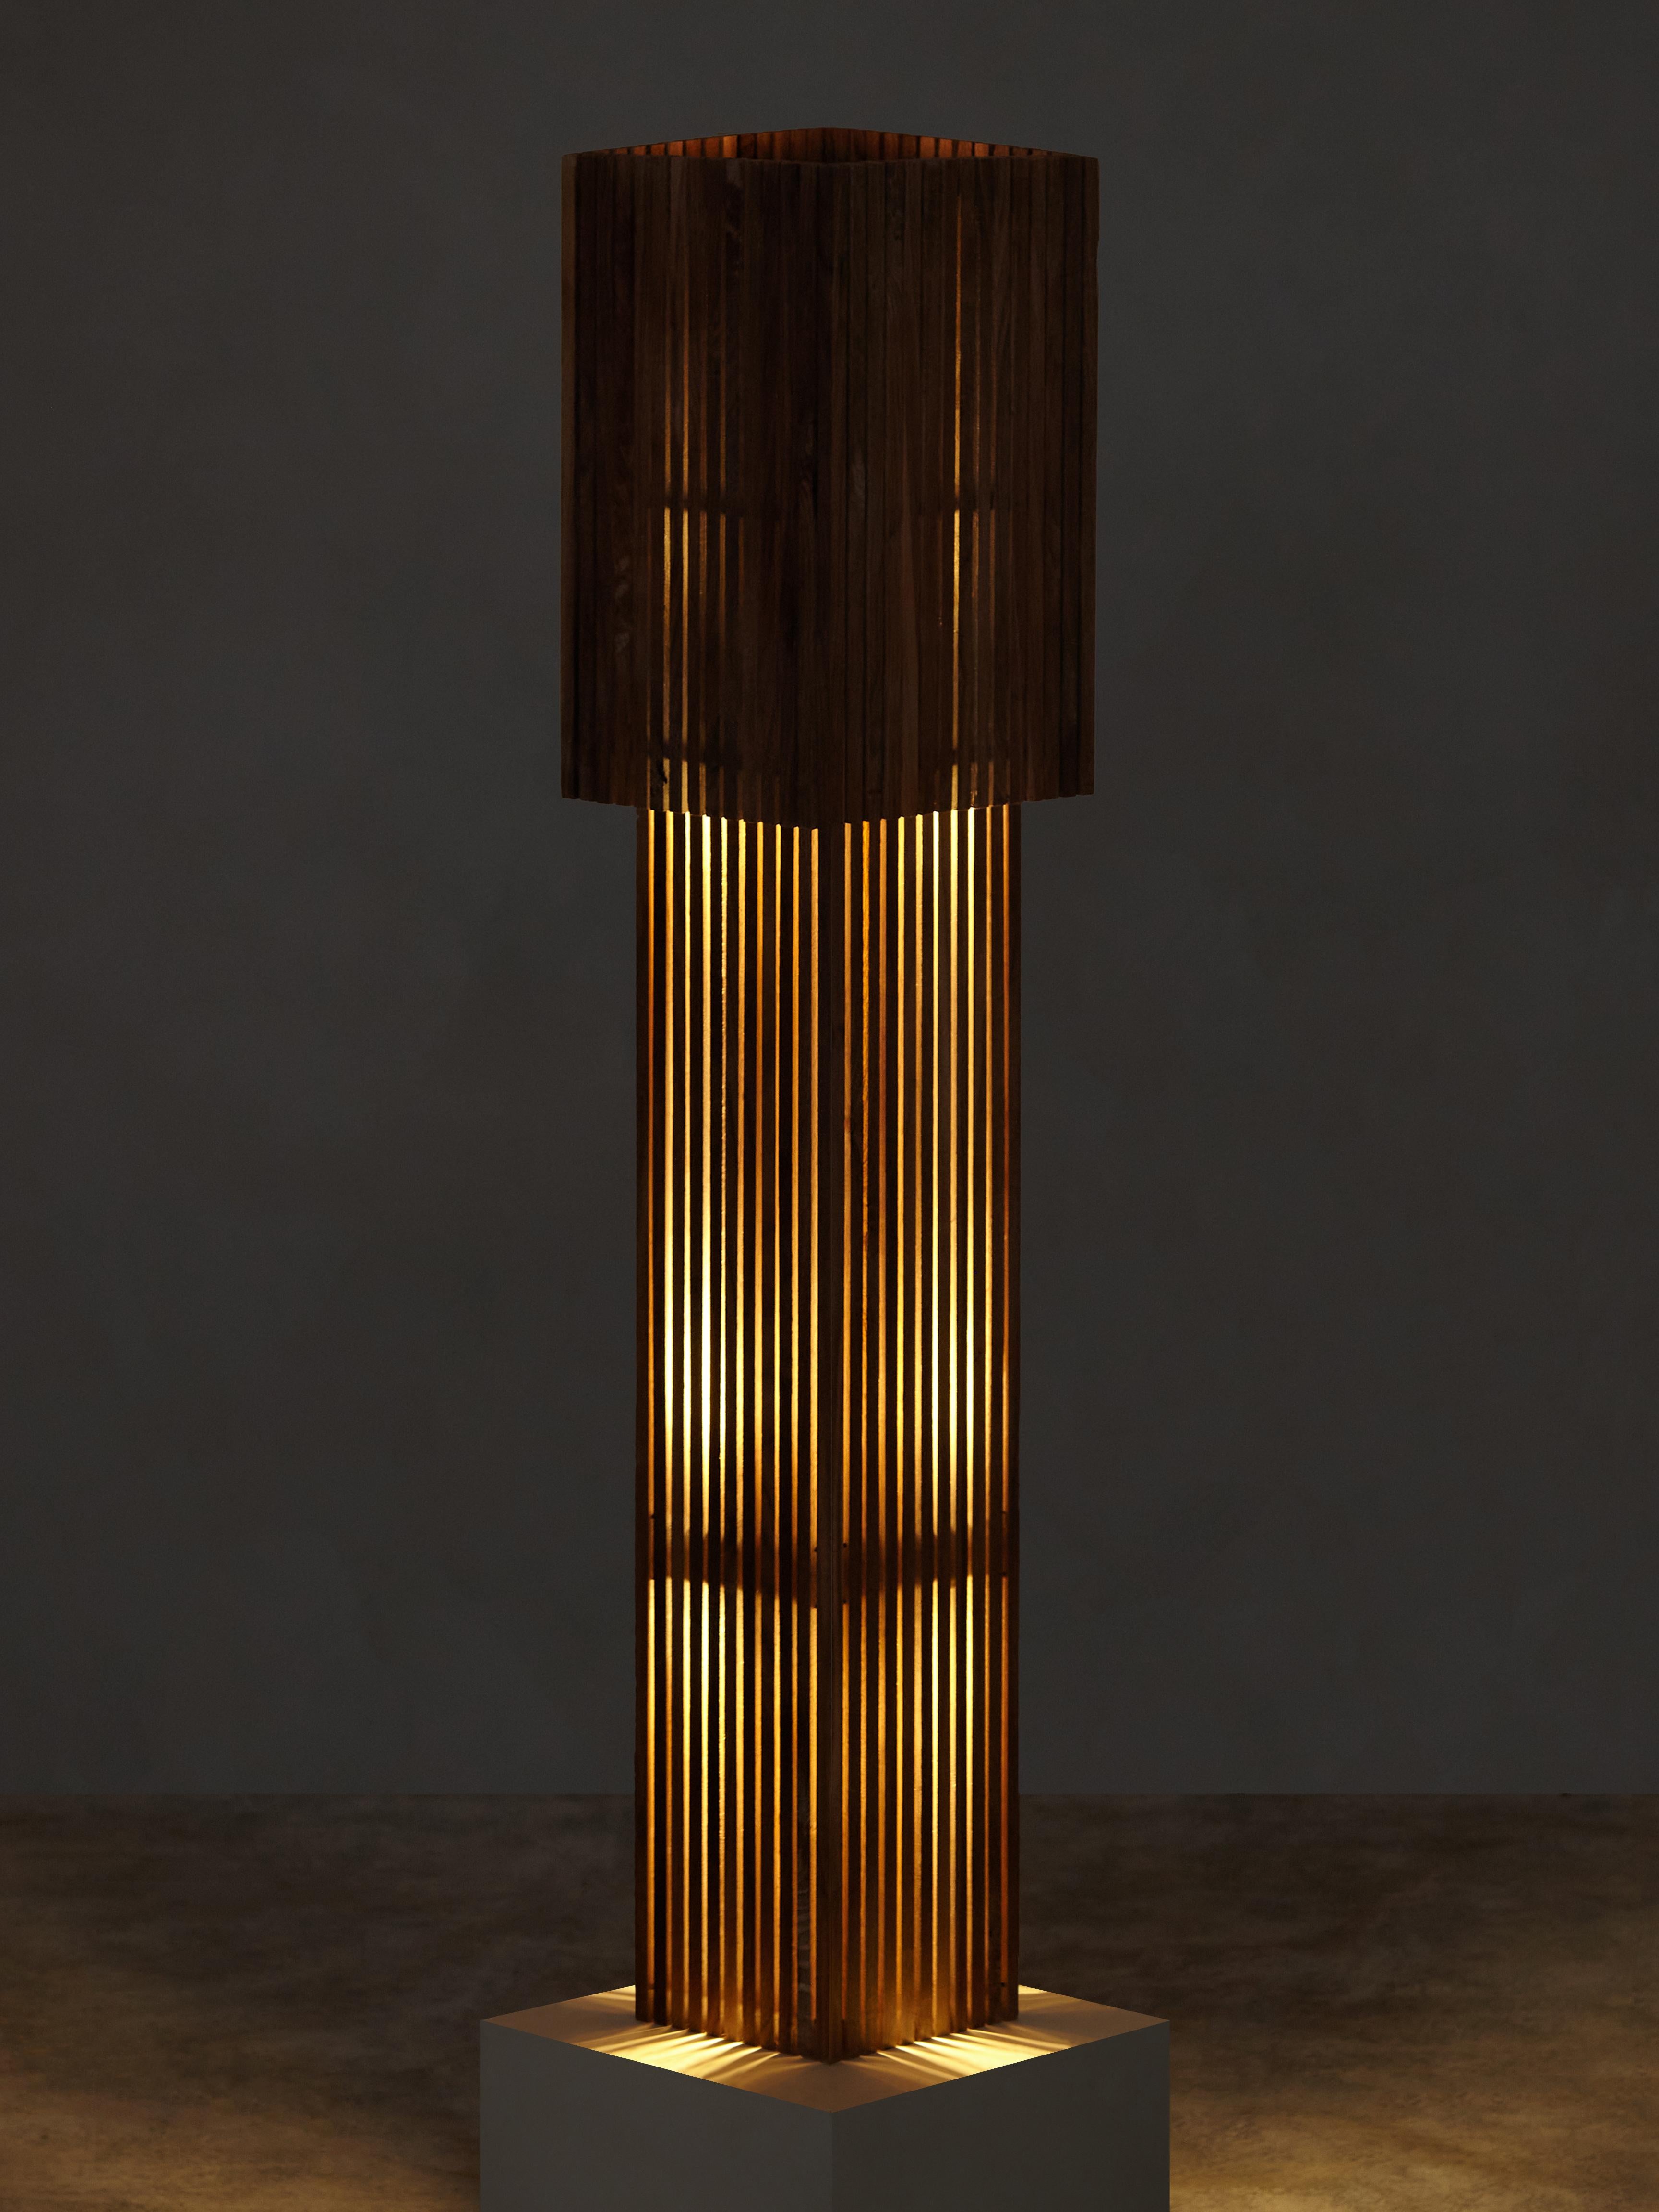 Hand-brushed wooden dowels both block and direct the lamp’s concealed LED bulb, casting an uneven glow through the vertical strips of the lamp’s body. The removable top-shade functions as a manual dimmer, allowing the lamp to transform in shape and